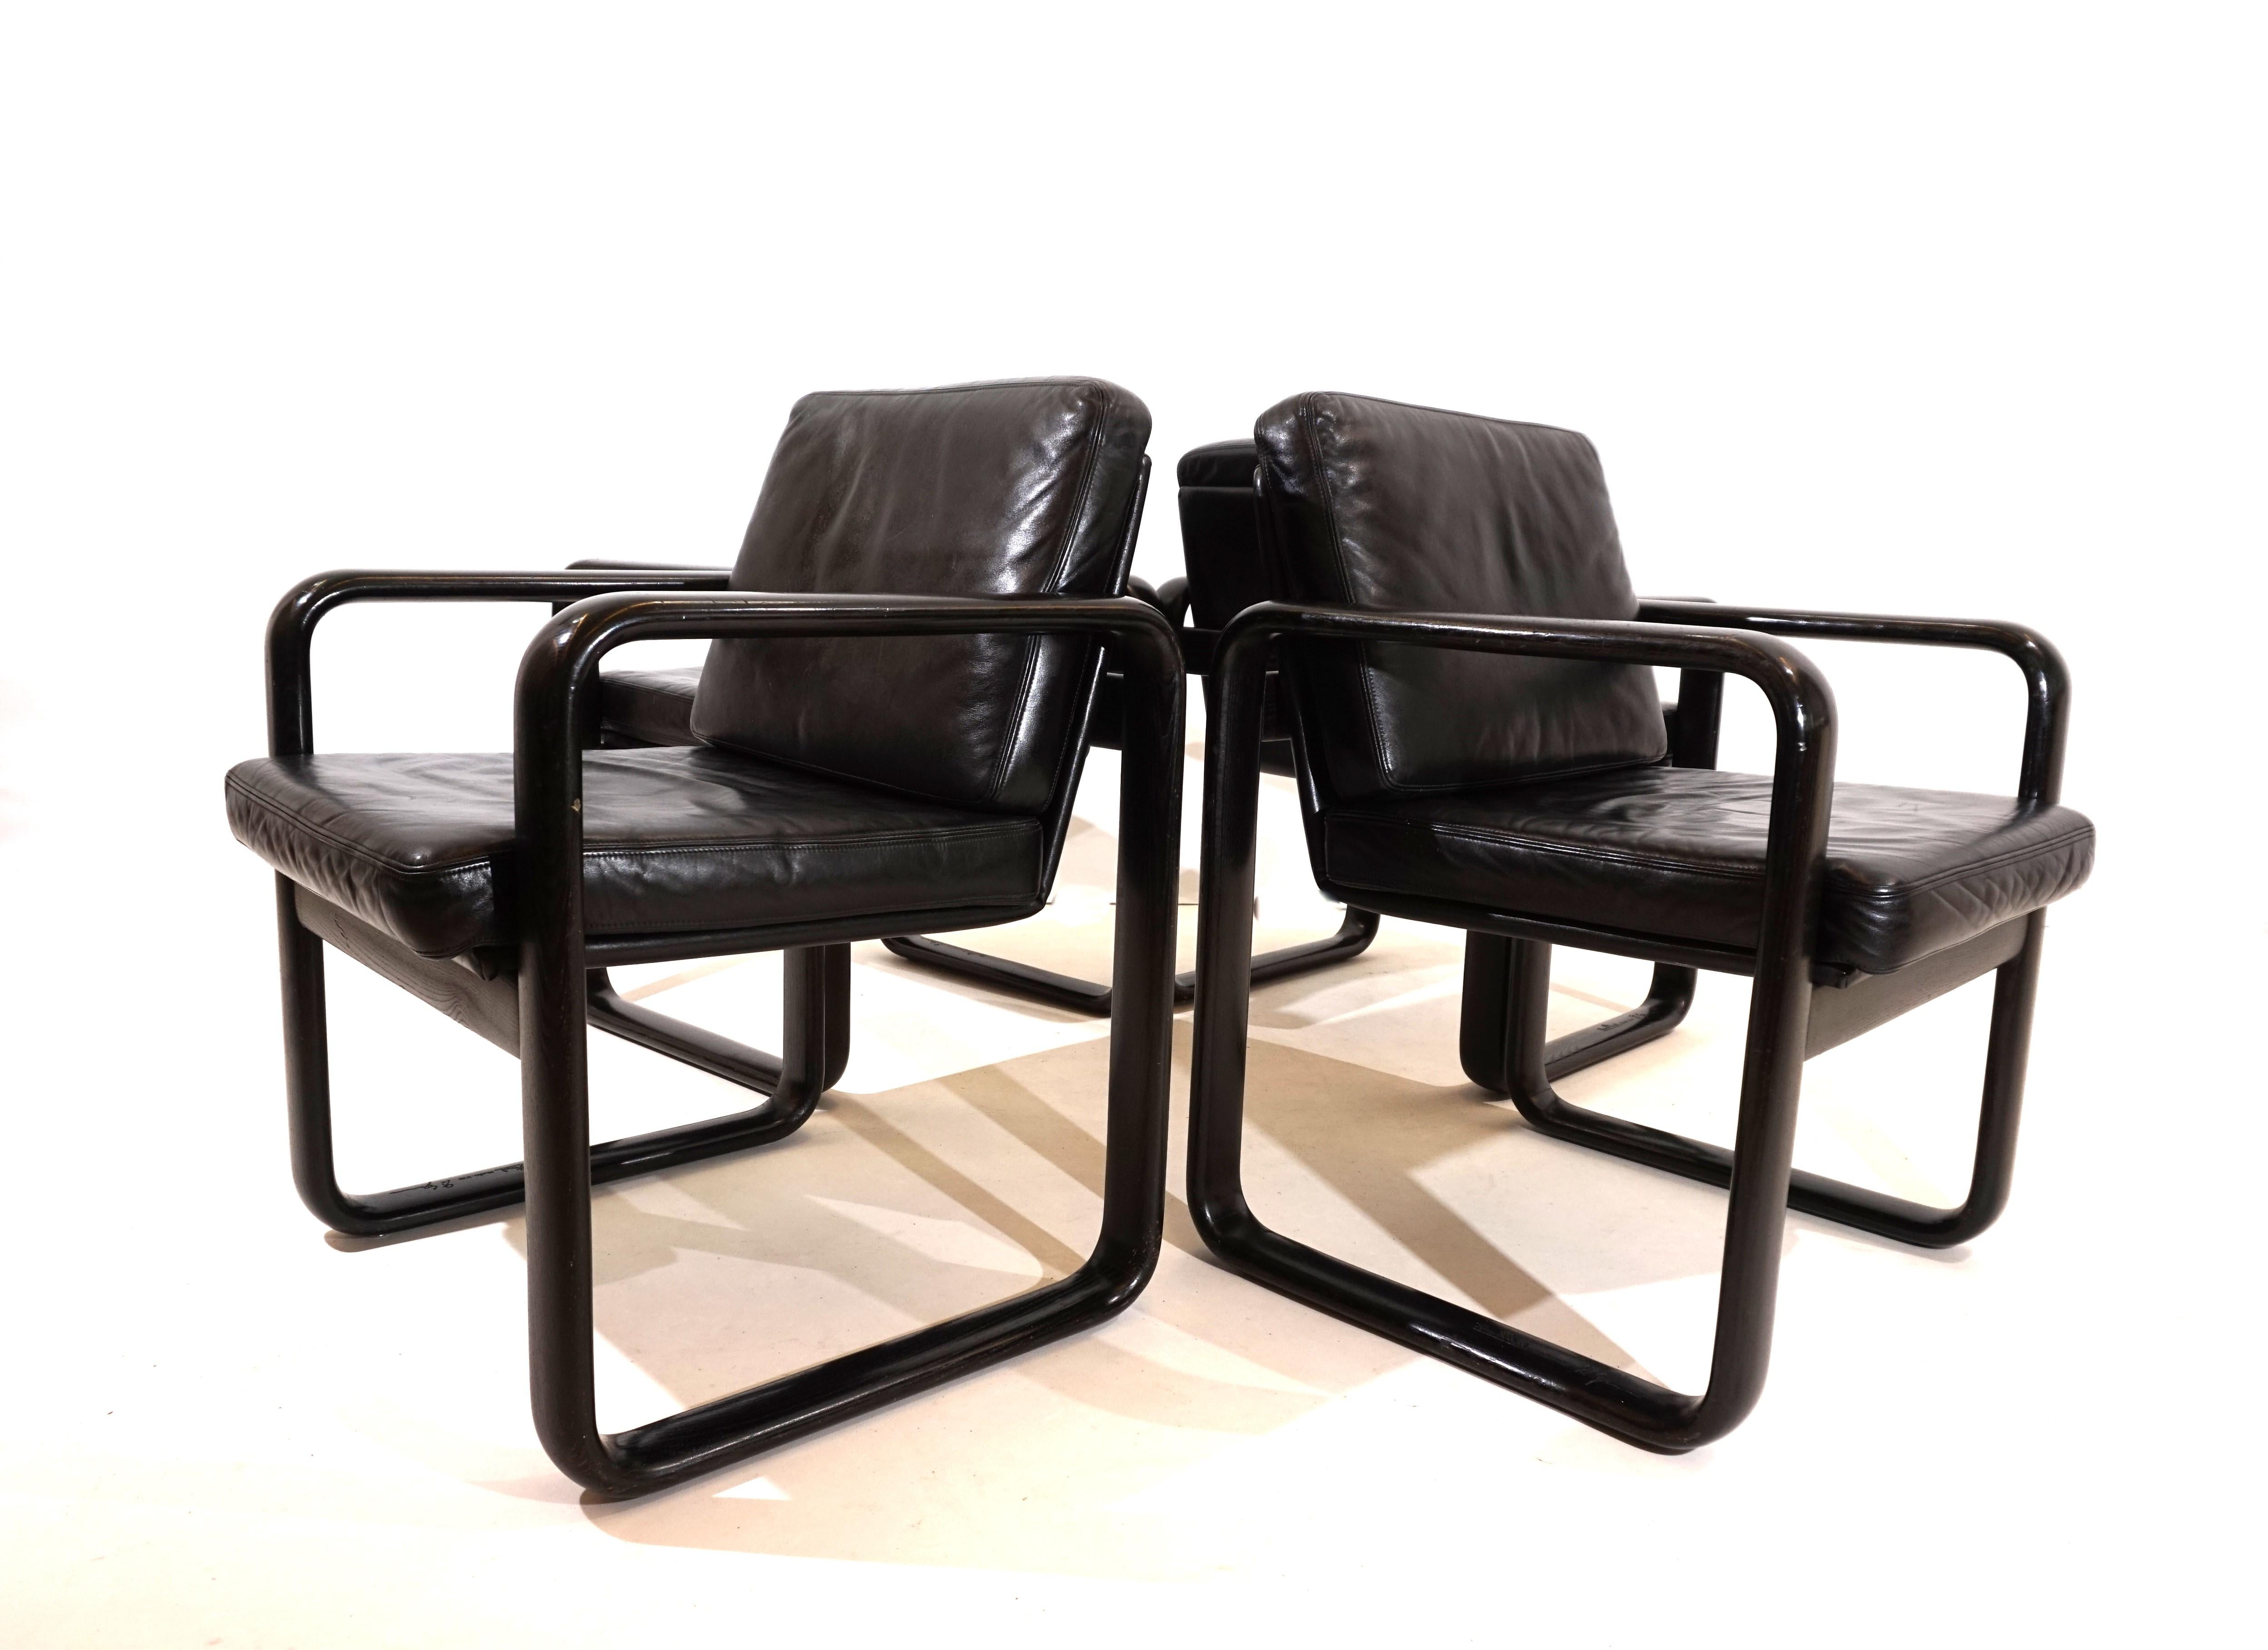 The set of 4 of these striking Hombre chairs comes in the most popular color combination of black leather/black wooden frame. The leather of the chairs is in very good condition and the seating comfort is impeccable. The cubist wooden frames of the